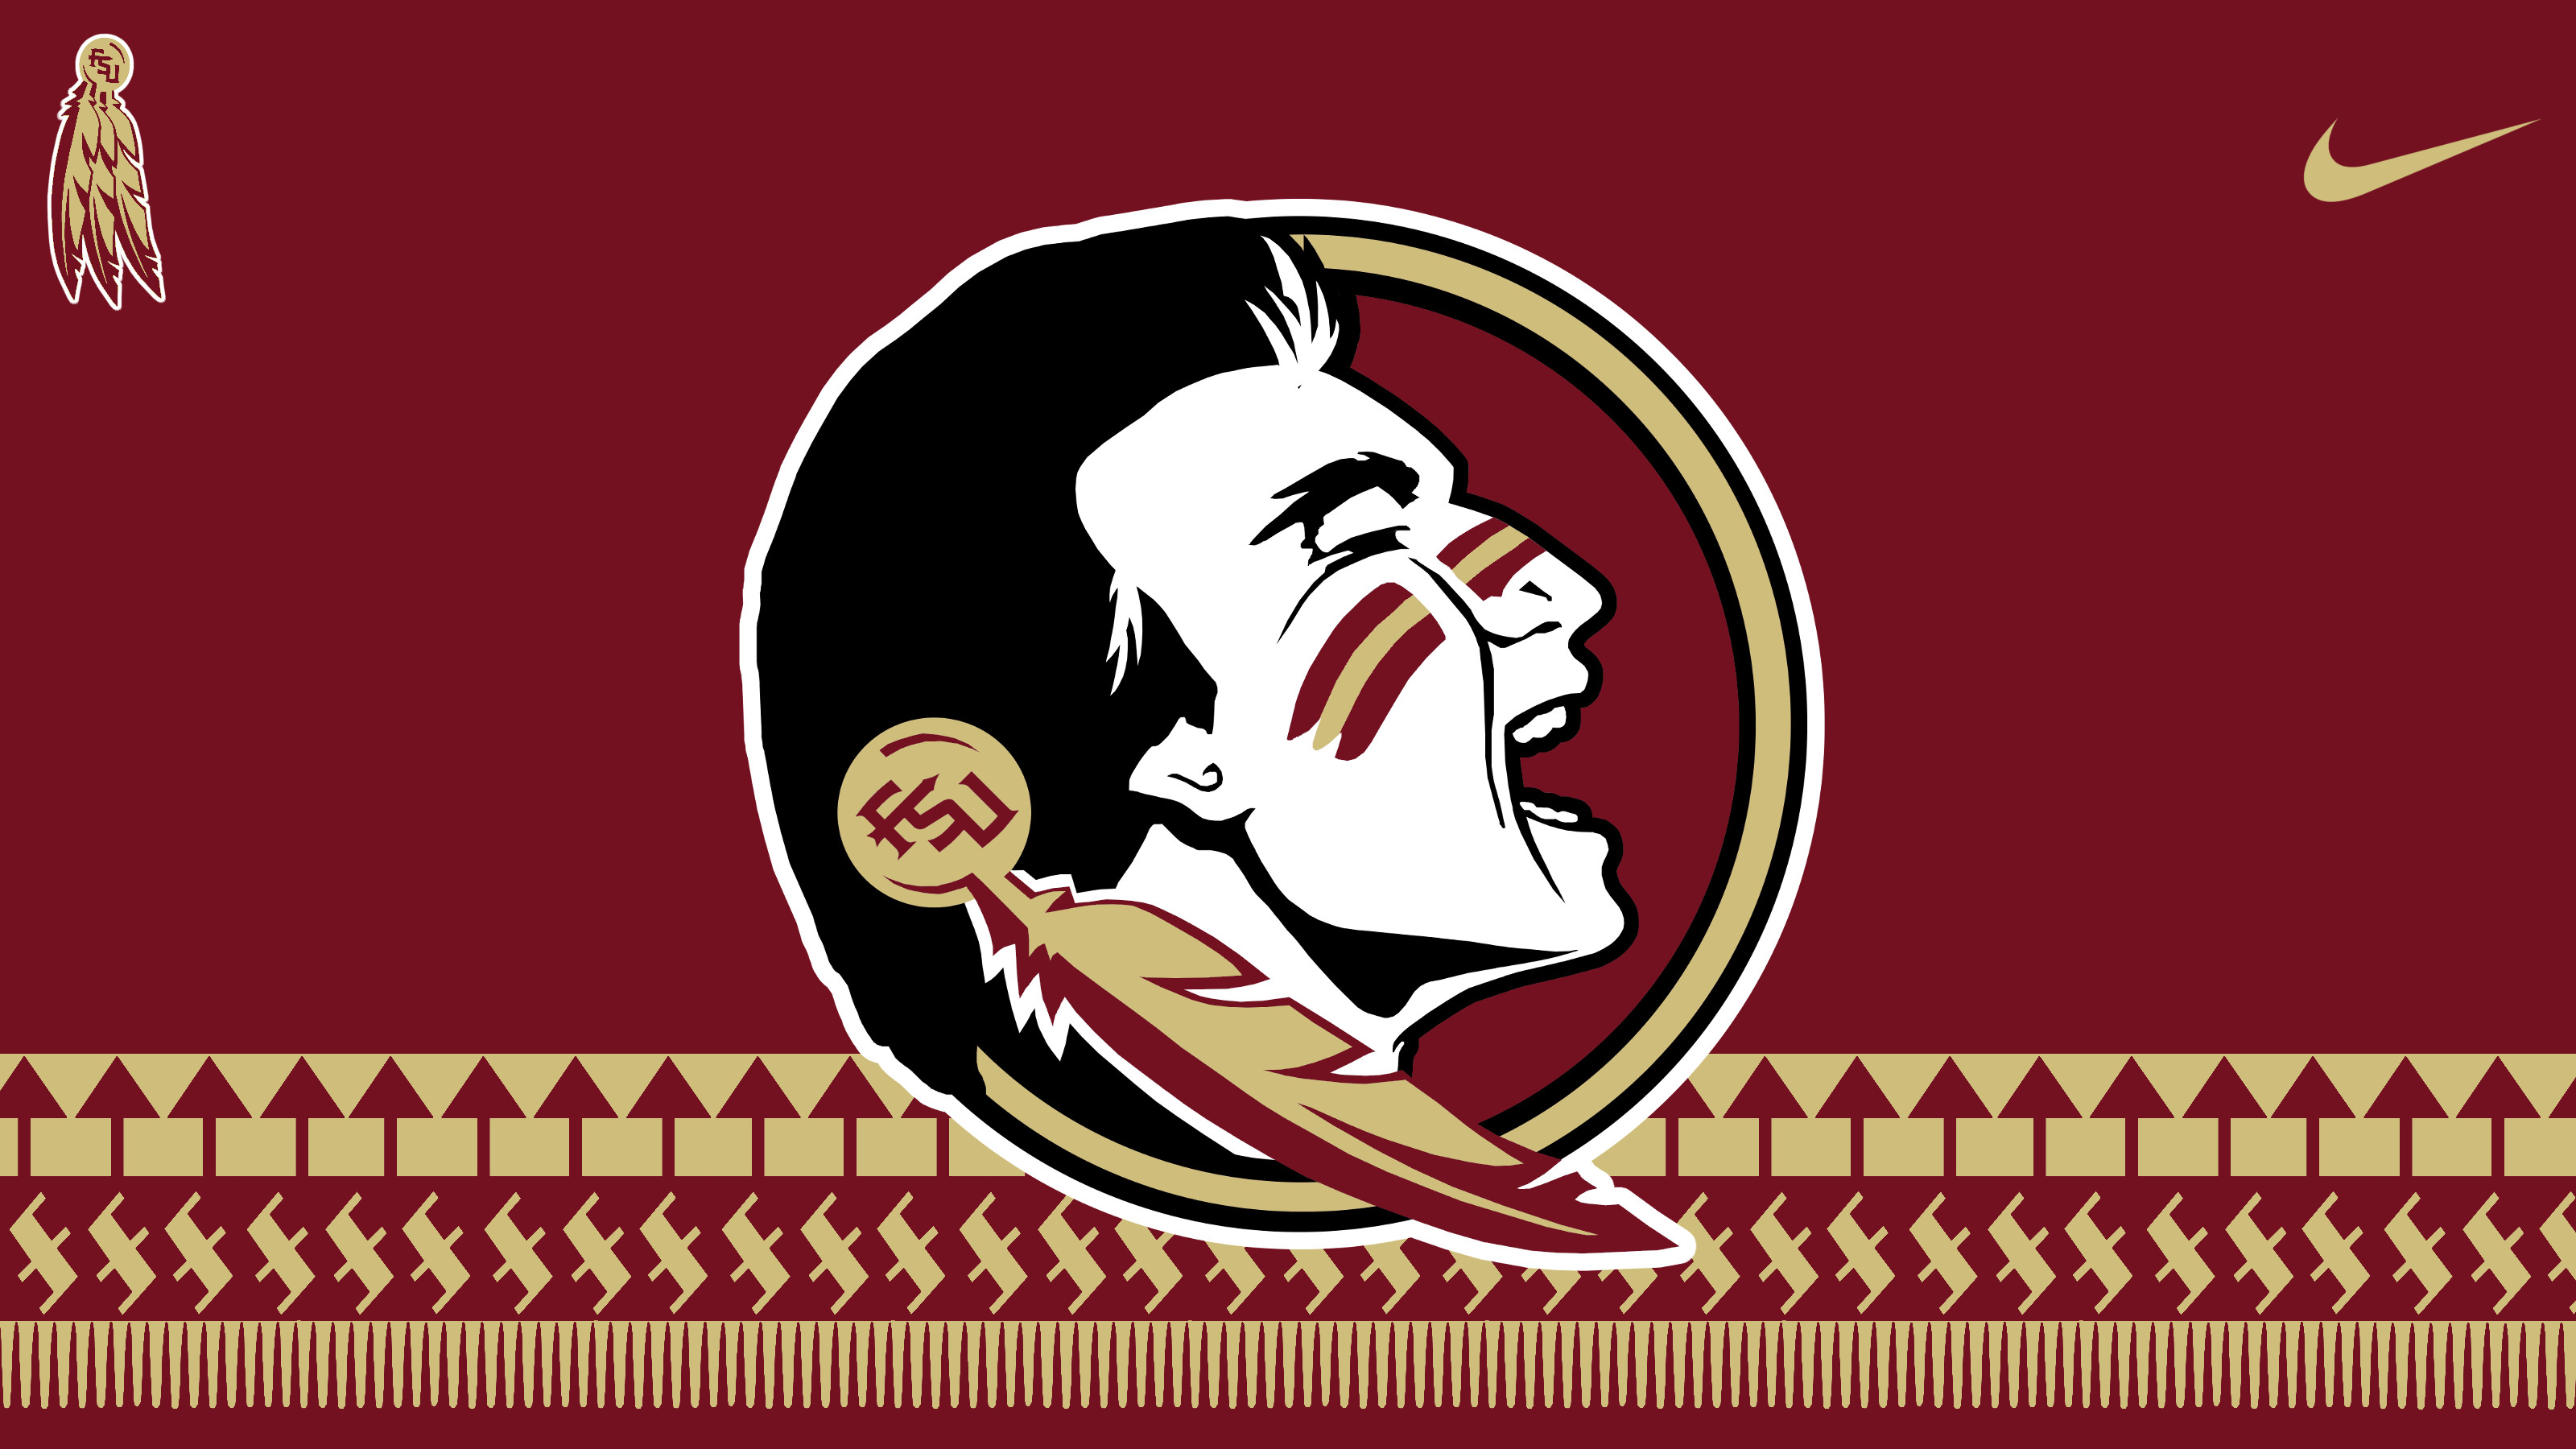 FSU   Miami Rivalry Weekend Wallpaper AND MORE   Concepts   Chris